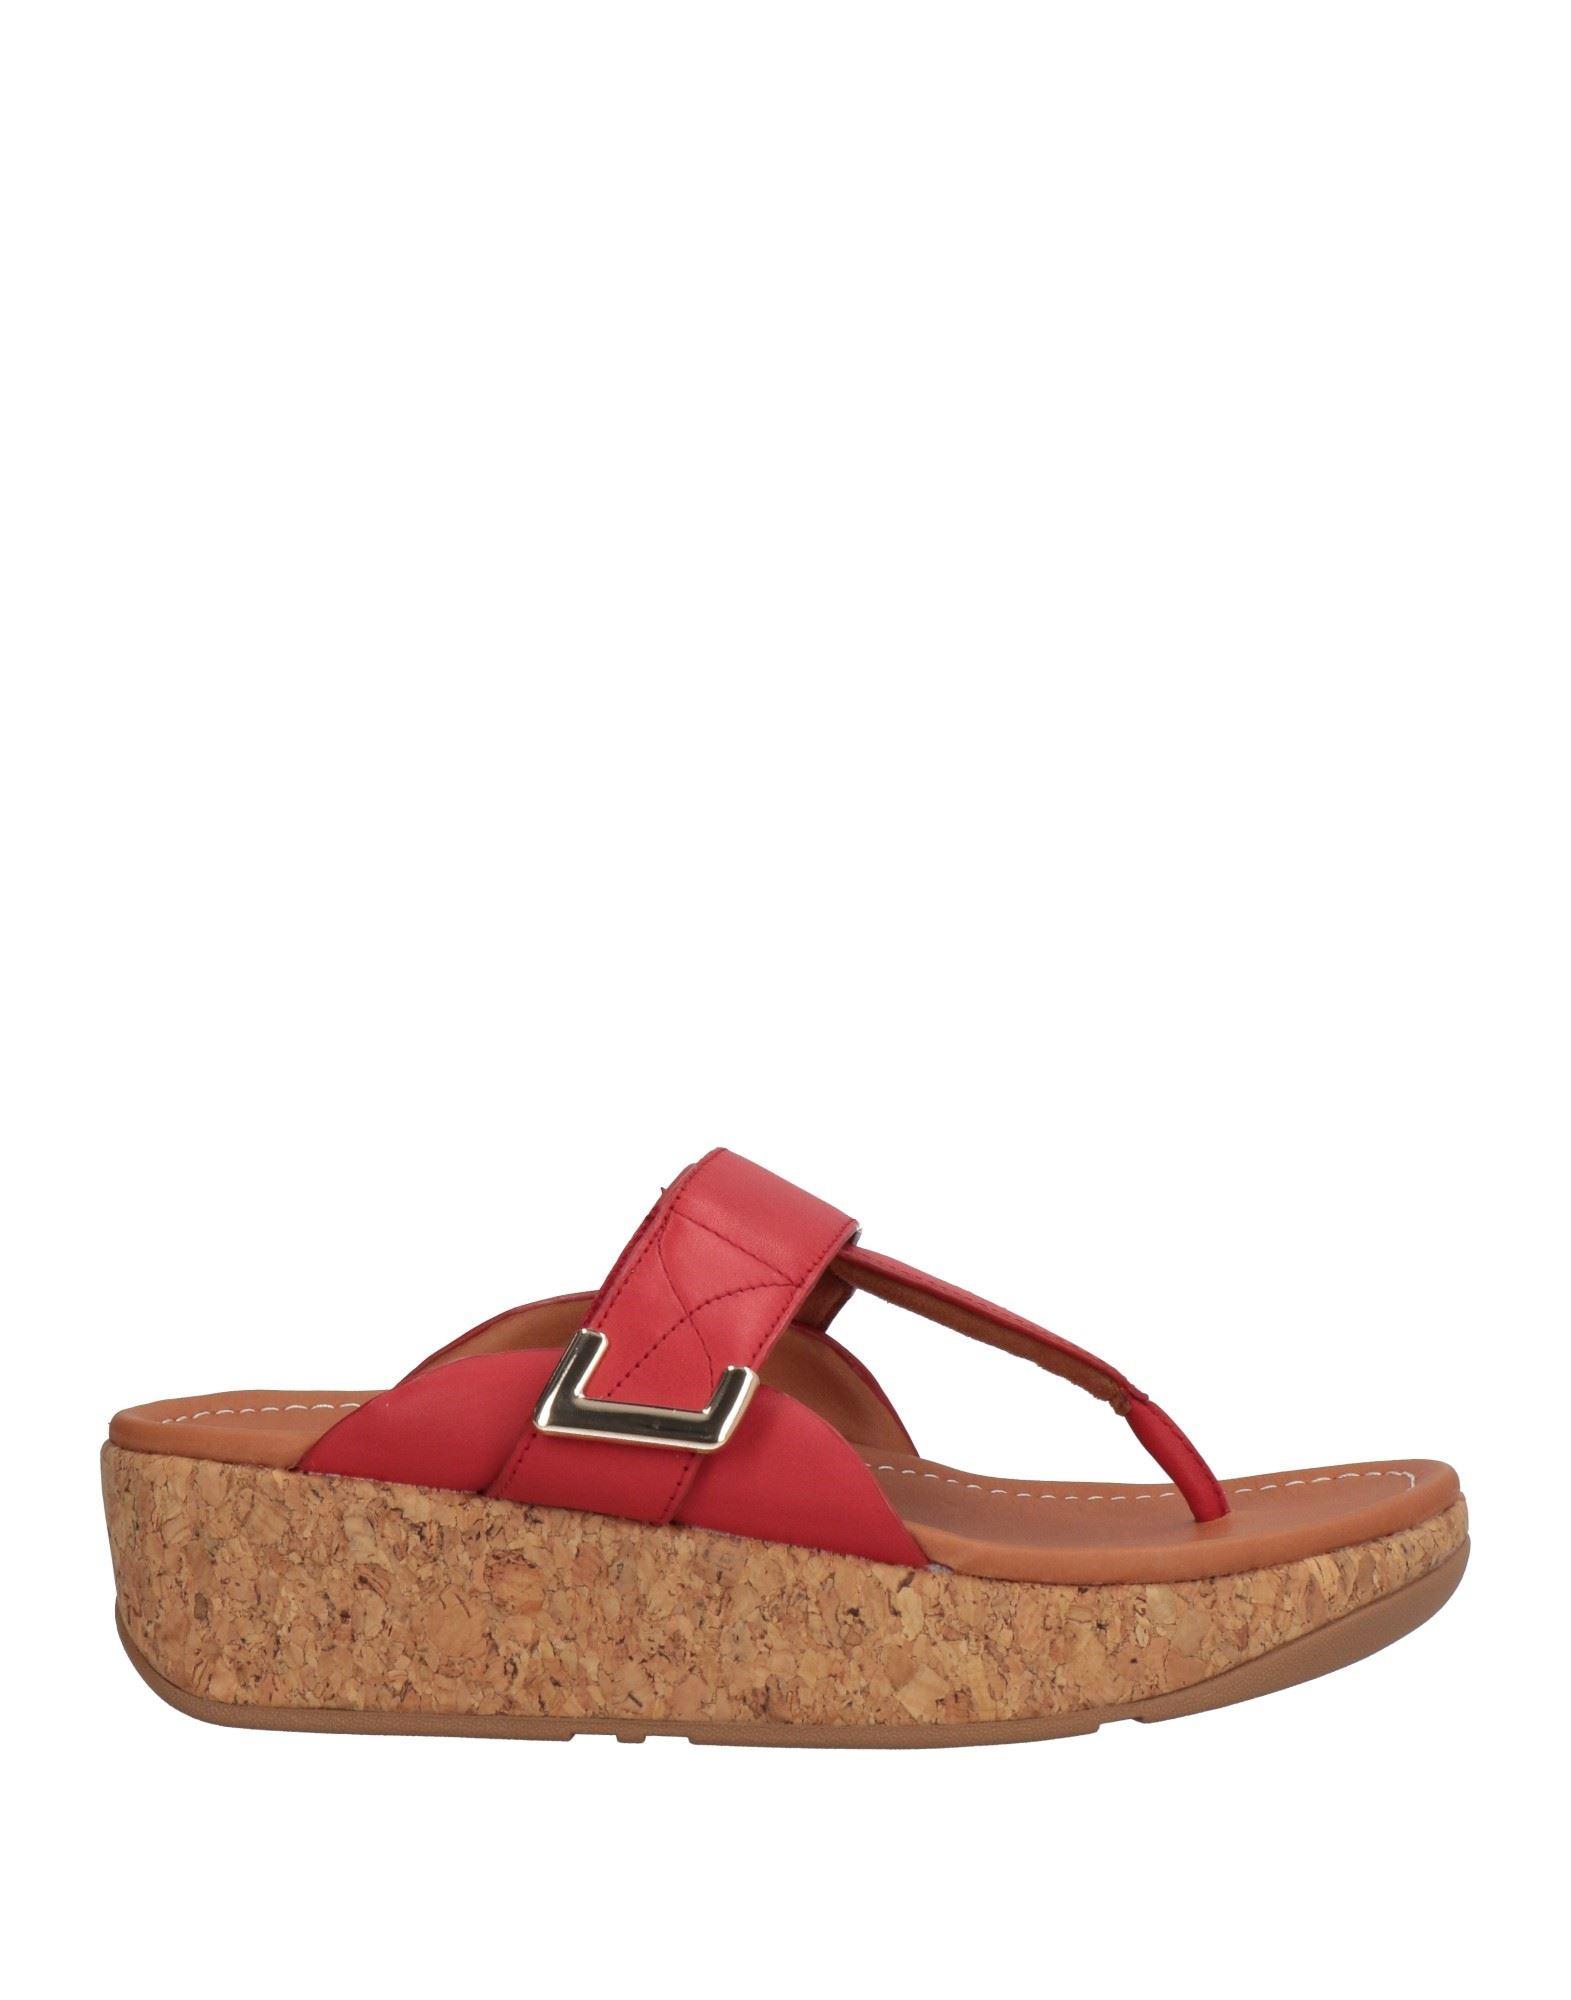 Fitflop Toe Post Sandals in Red | Lyst